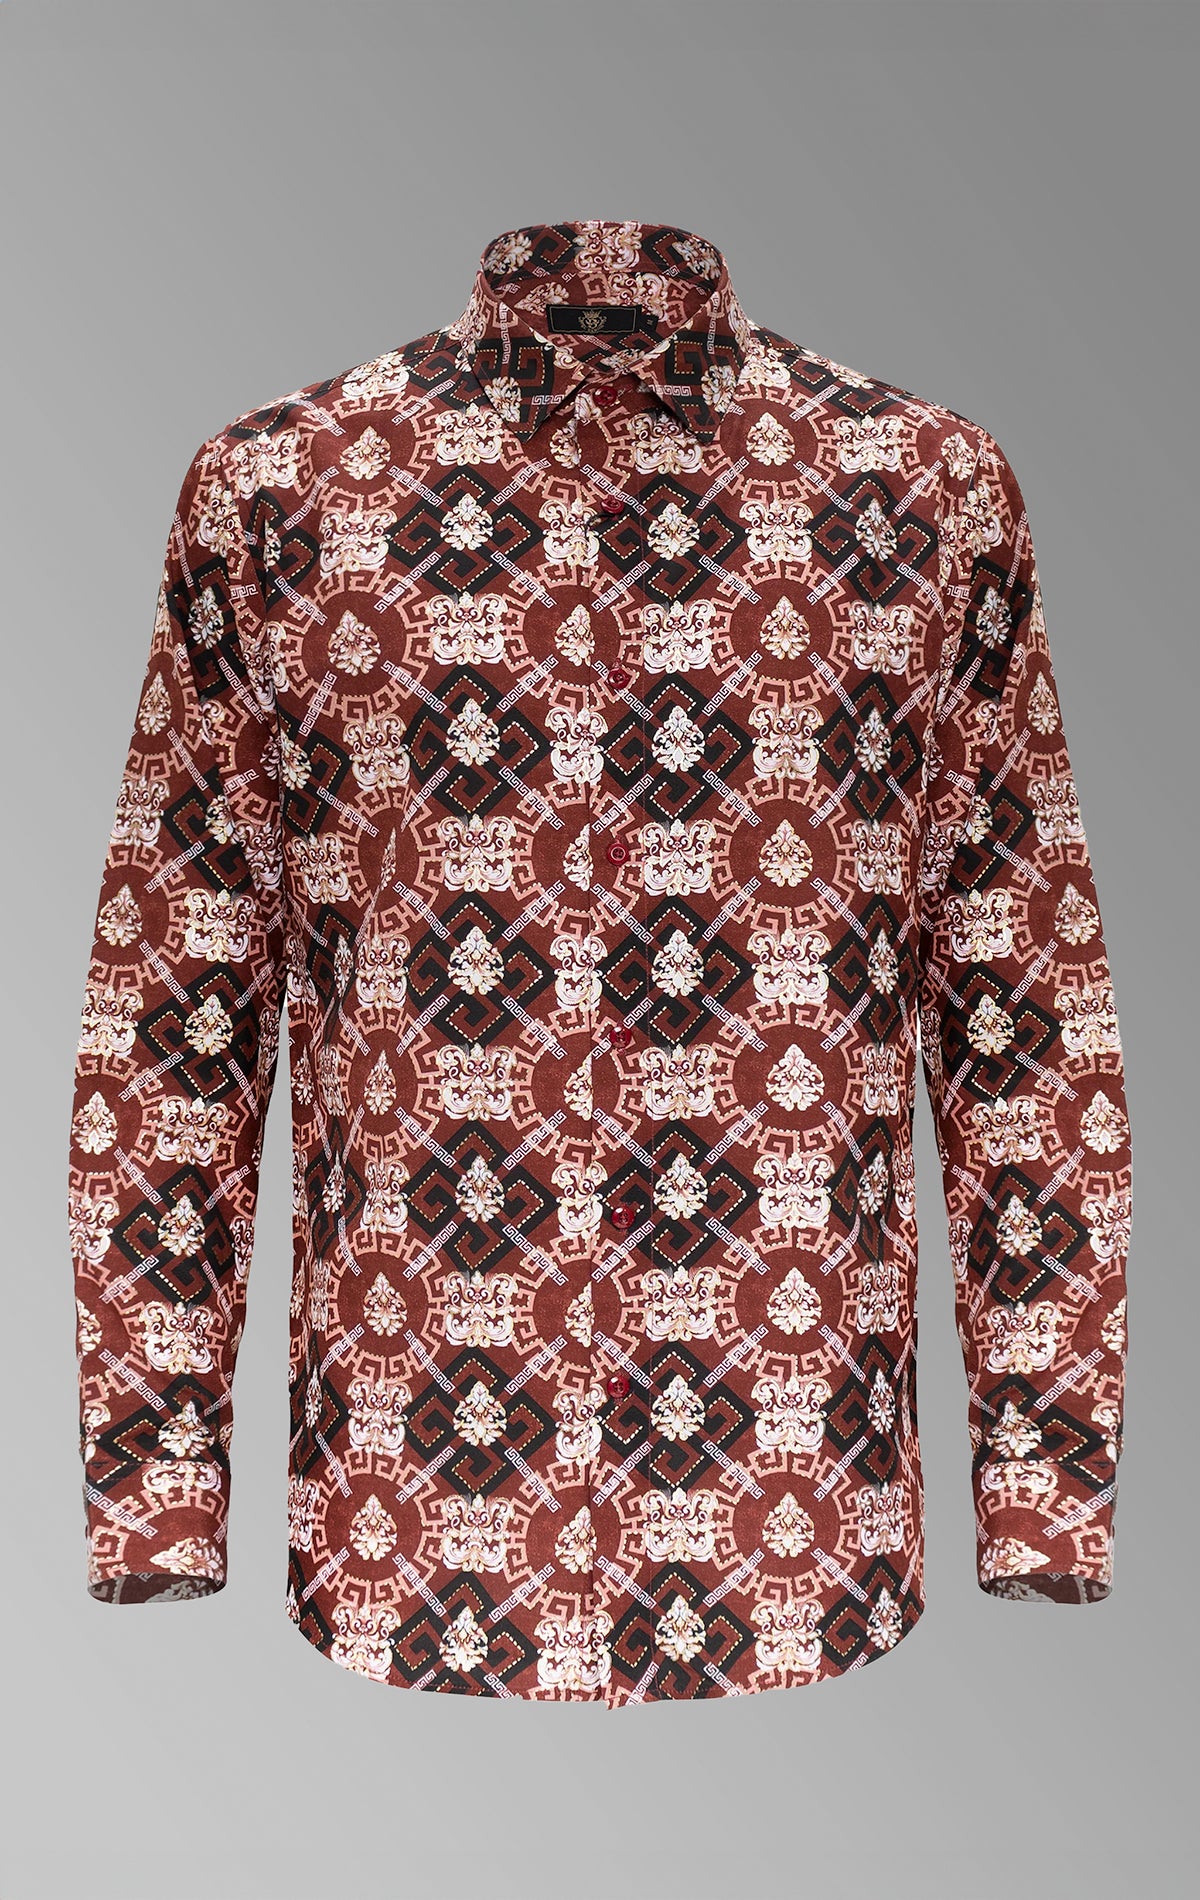 Captivating shirt with playful and dynamic designs for casual occasions.